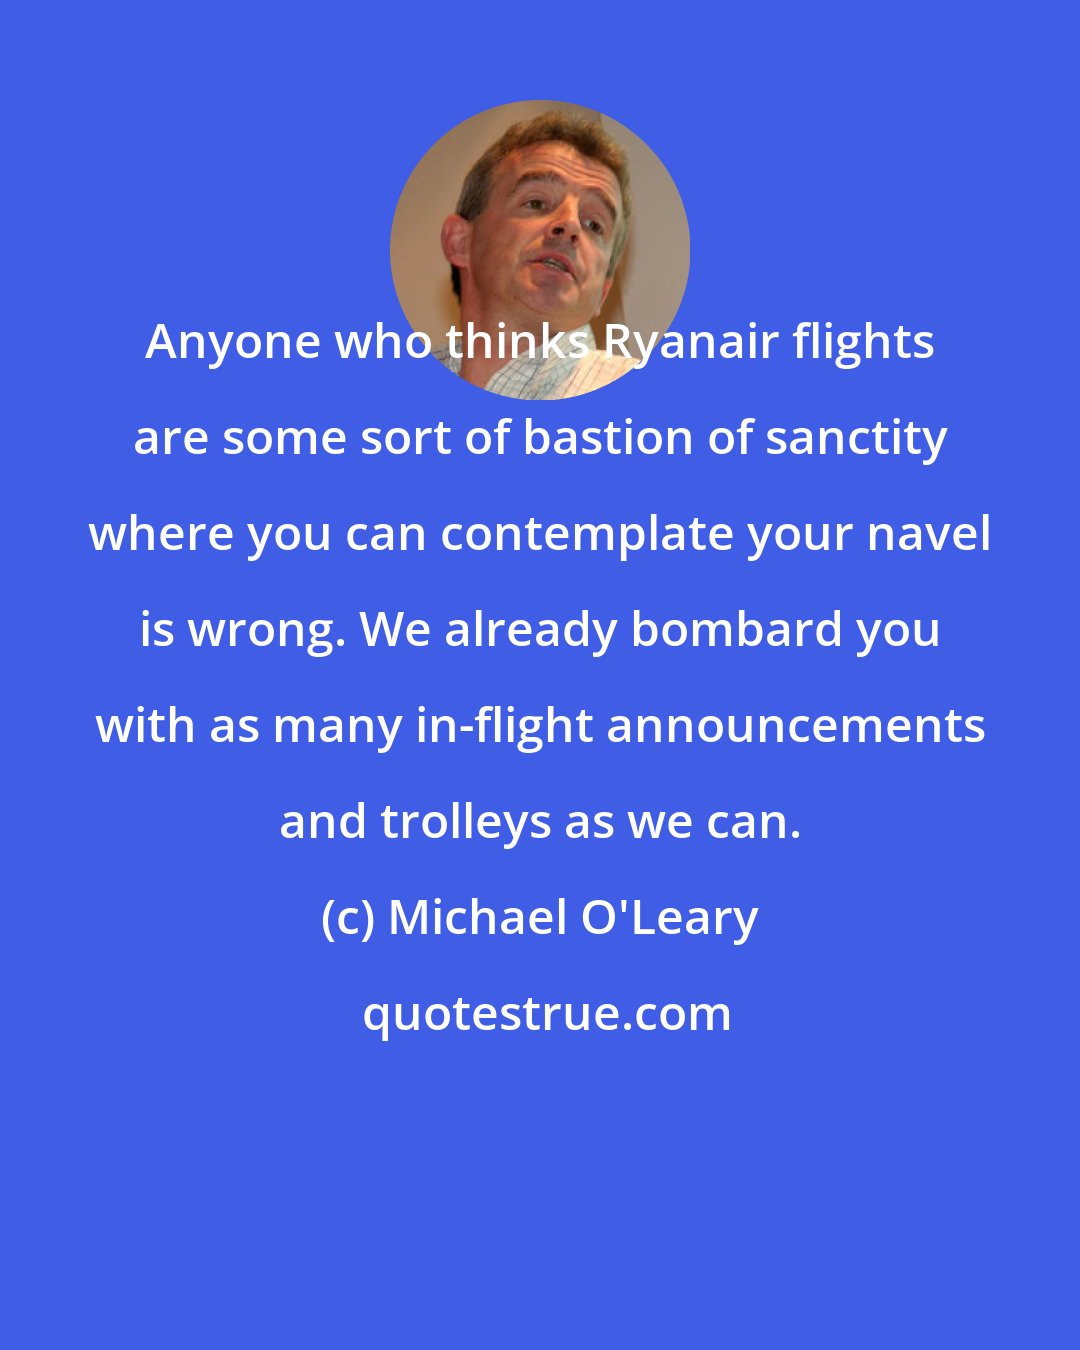 Michael O'Leary: Anyone who thinks Ryanair flights are some sort of bastion of sanctity where you can contemplate your navel is wrong. We already bombard you with as many in-flight announcements and trolleys as we can.